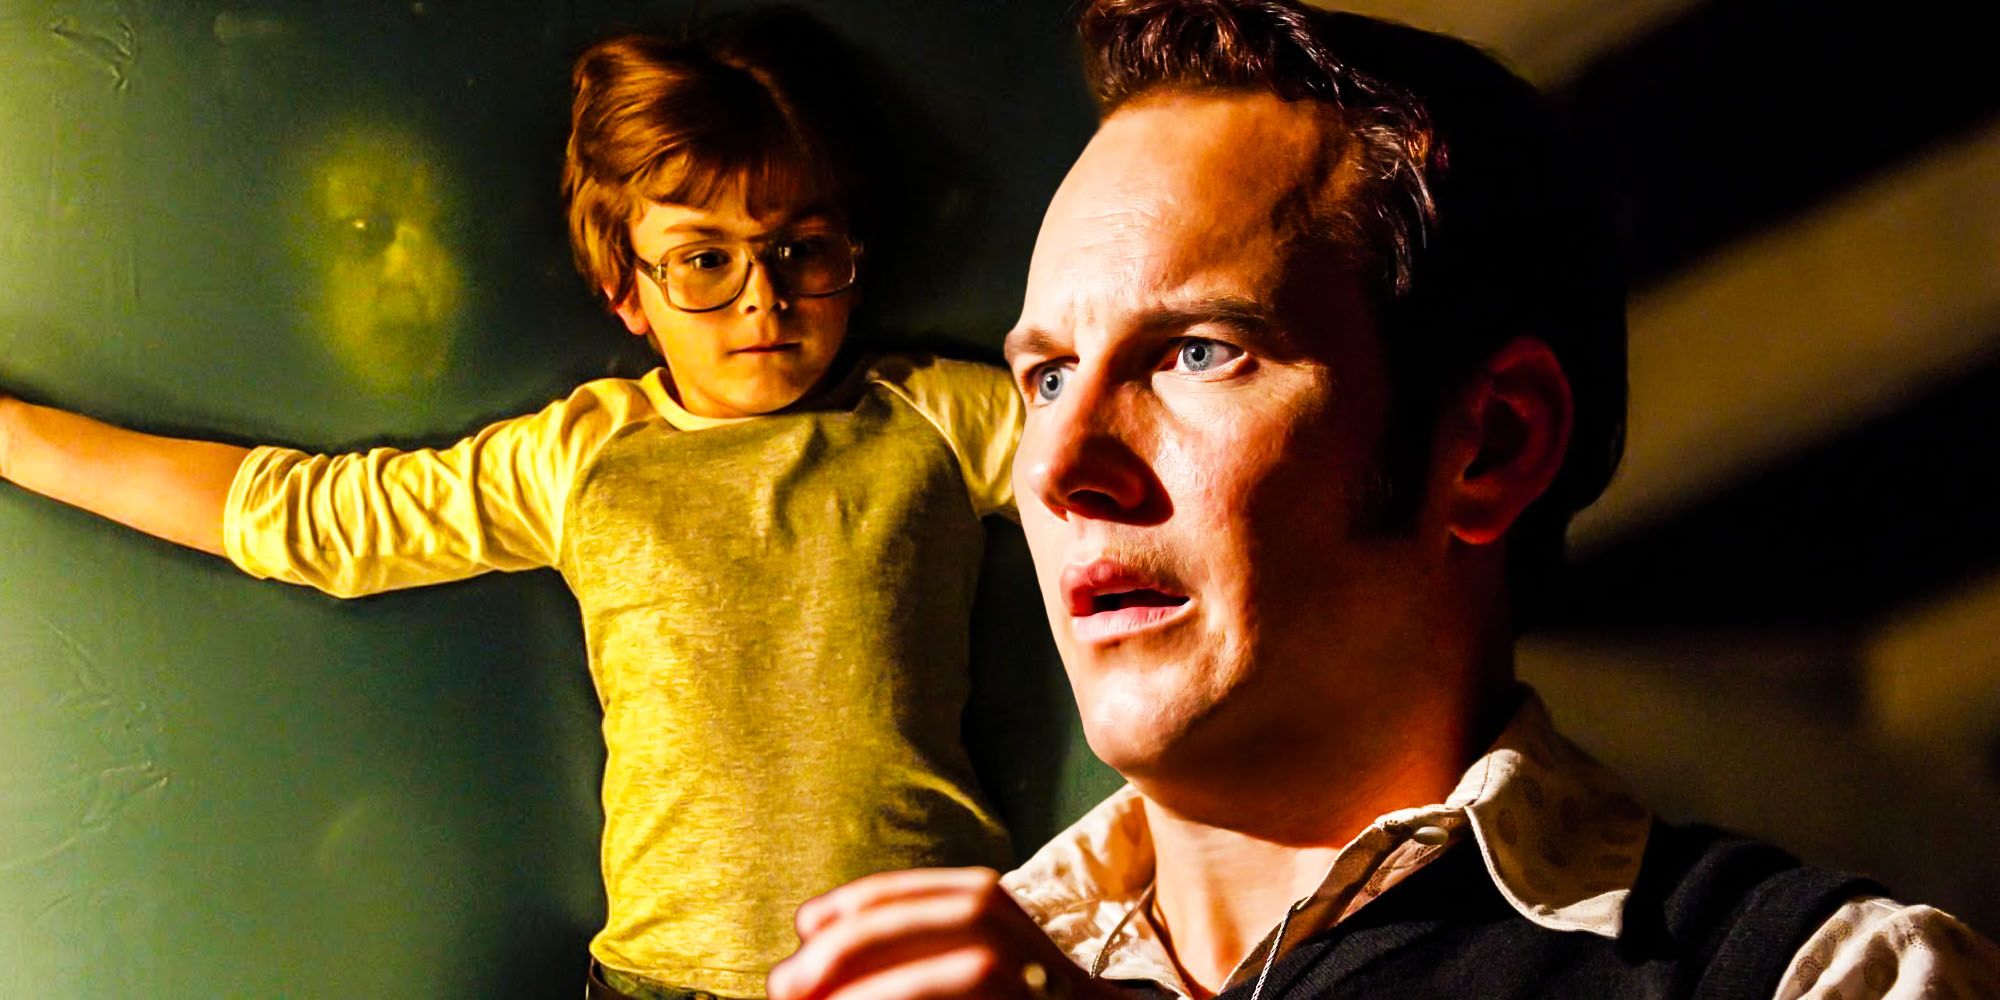 Patrick wilson The Conjuring 3 lost demon